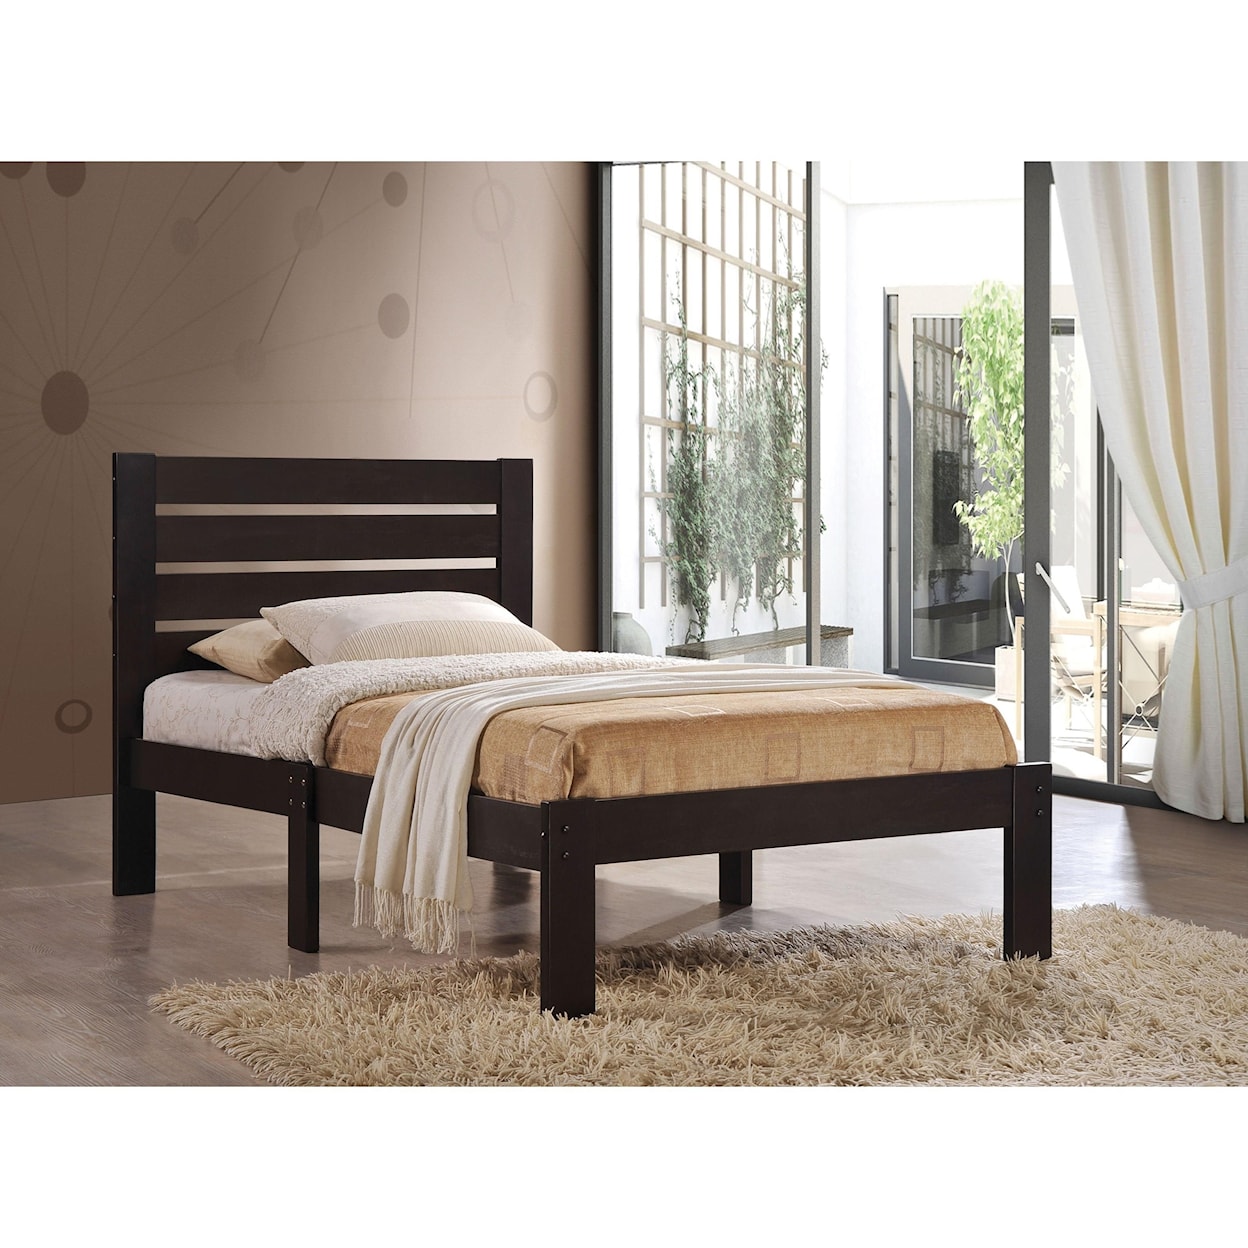 Acme Furniture Kenney Twin Bed